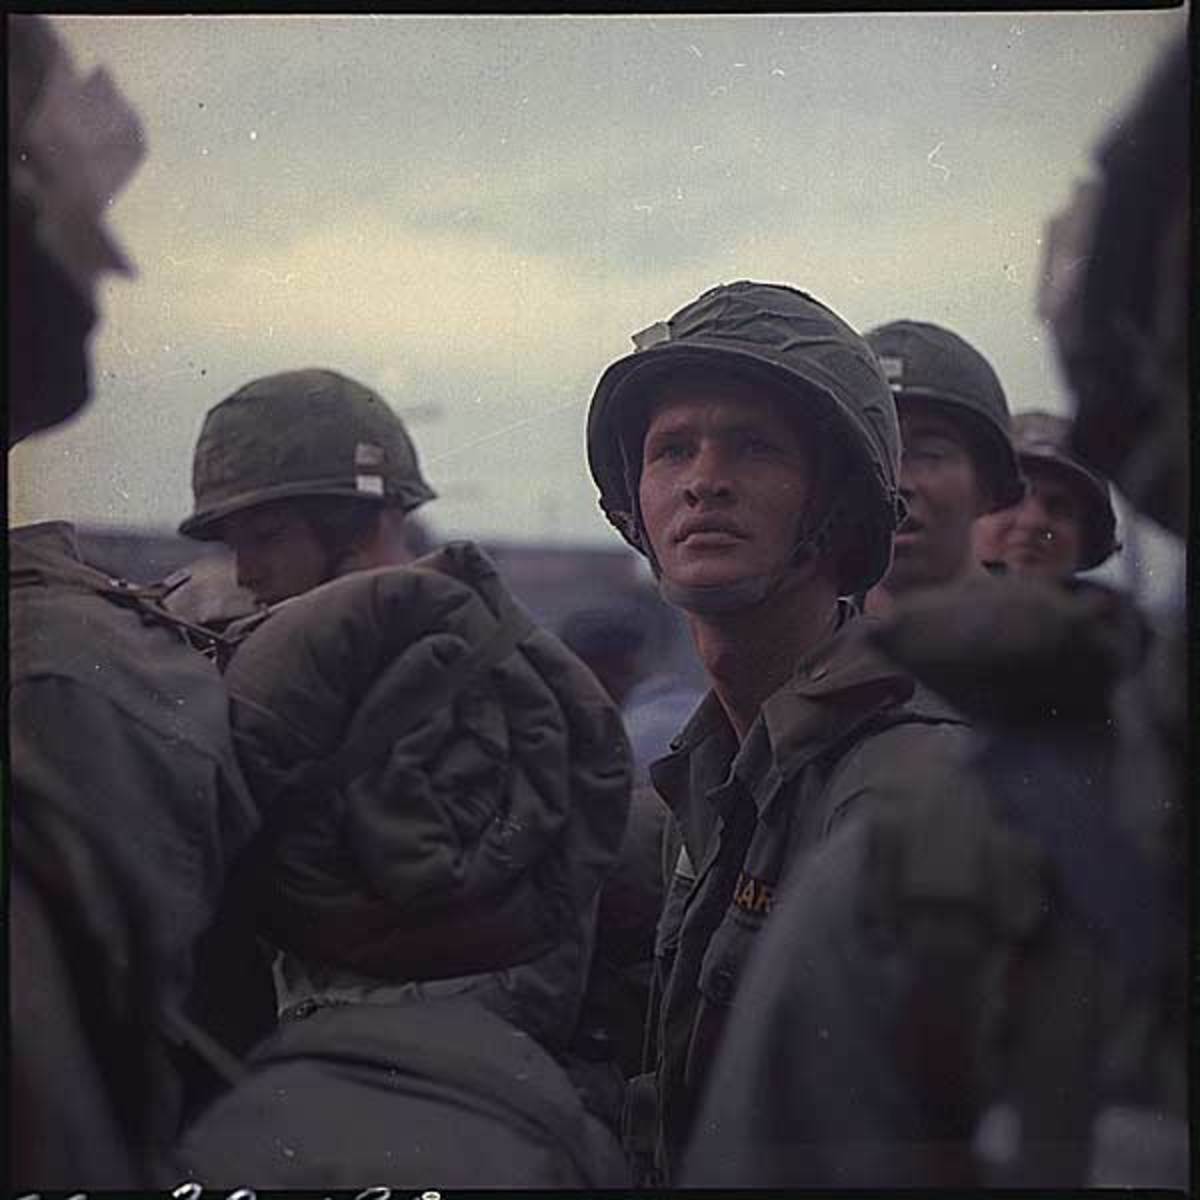 1965 Arrival of the U.S. 1st Cavalry Division (Air Mobile) in Vietnam. The 15,800 men, 424 Helicopters and Planes disembarked from troopship carriers at Qui Nhon and then immediately moved inland by air and convoy to their assigned tactical operation